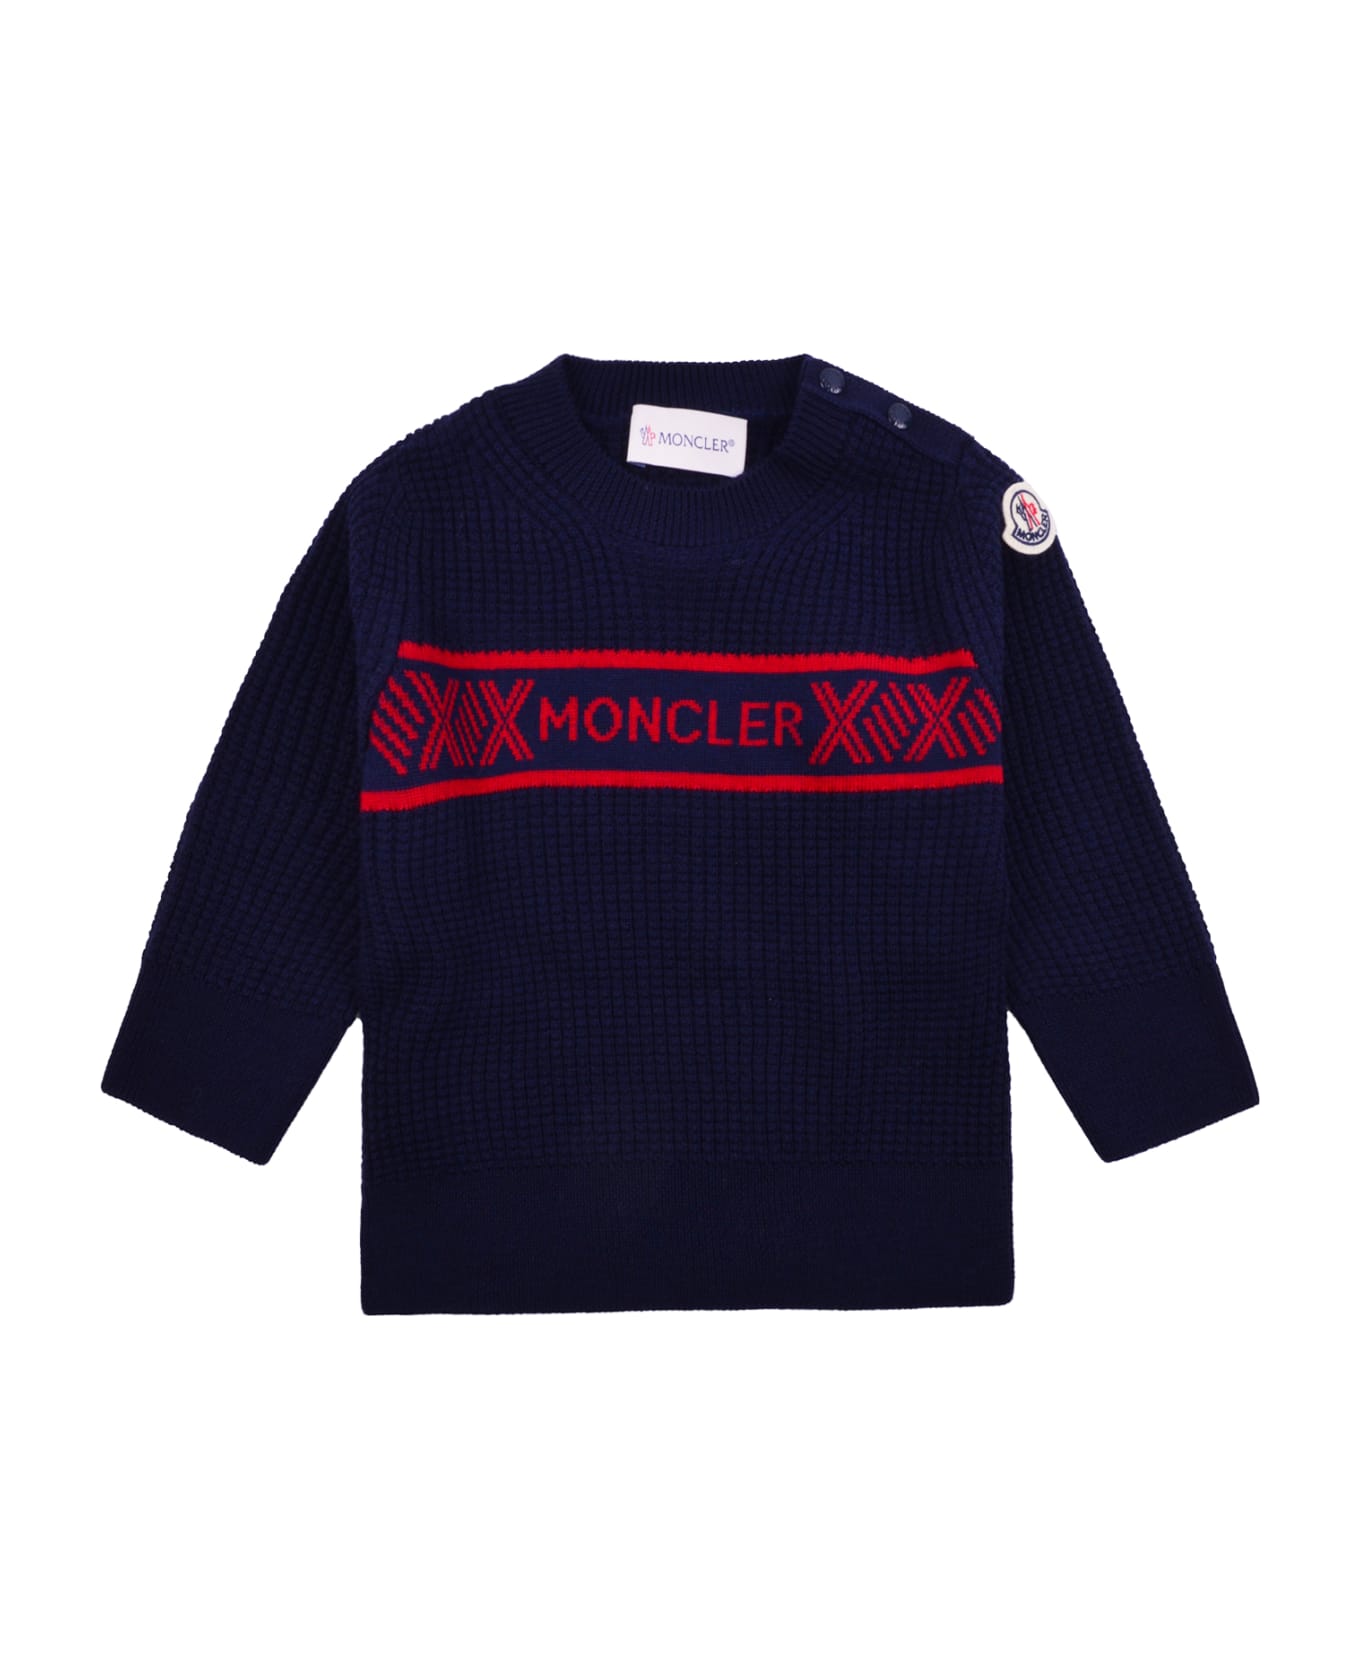 Moncler Wool Sweater With Logo - Blue